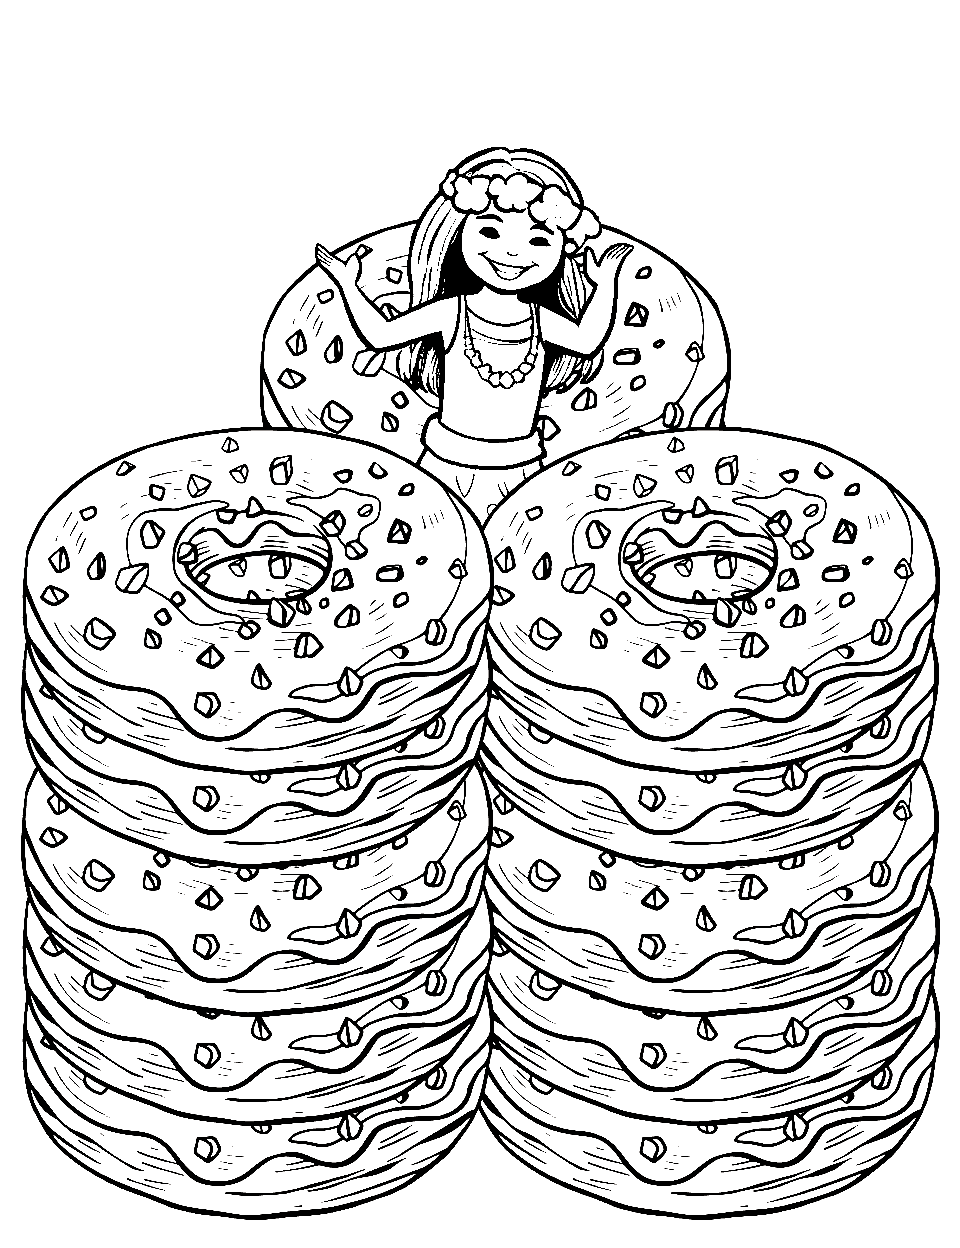 Girl and the Donut Tower Coloring Page - A girl on top of a tall tower made of donuts.